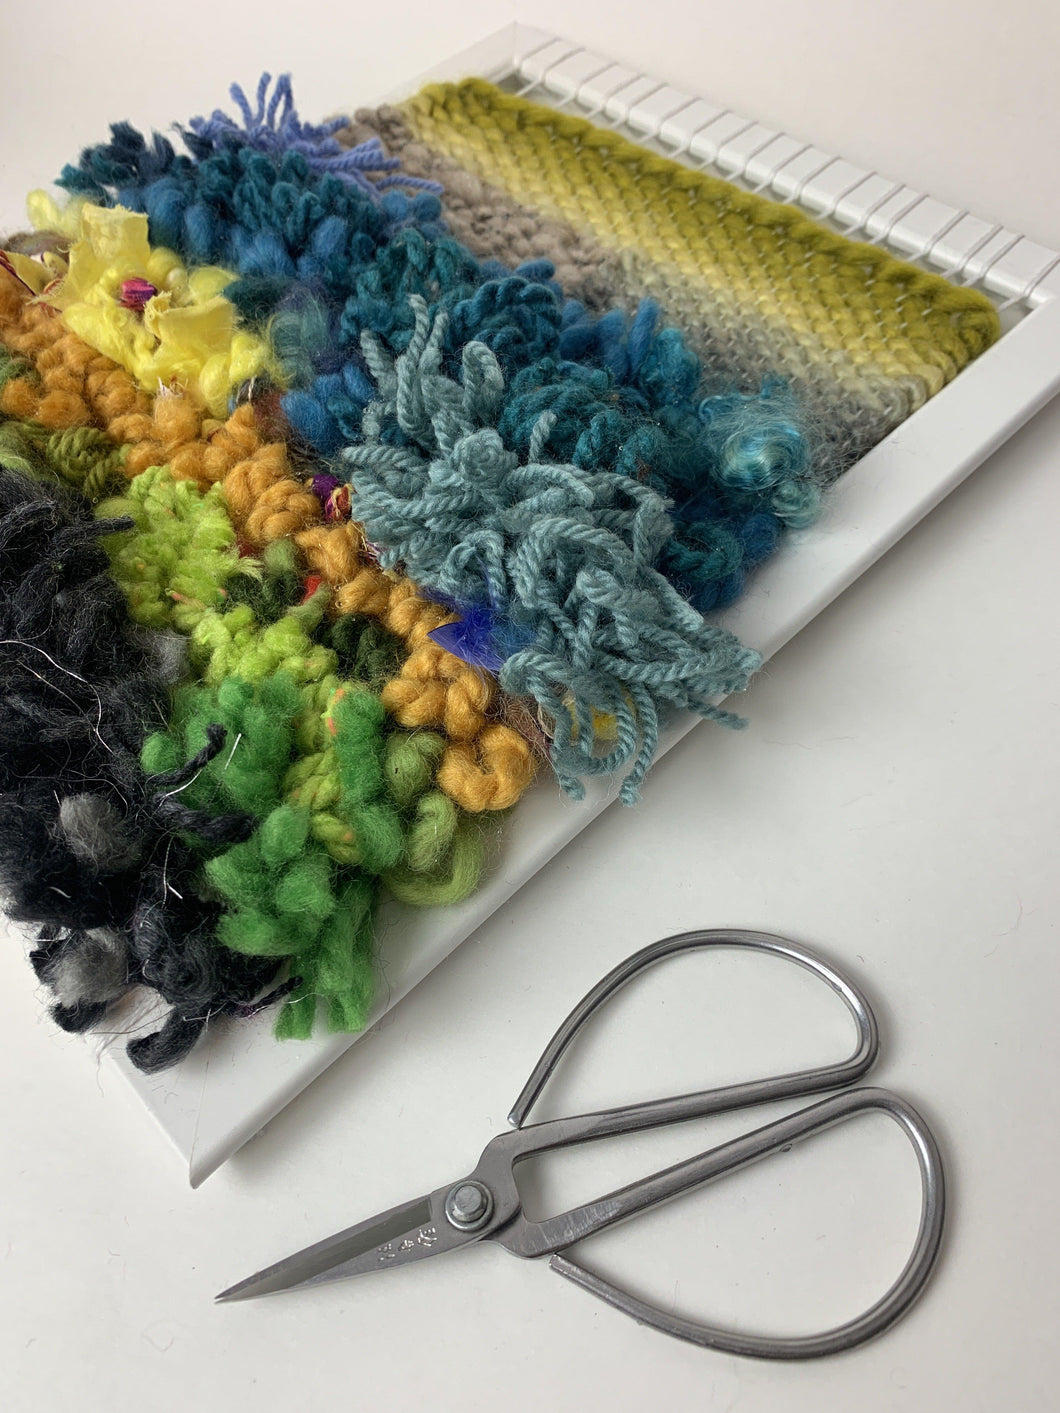 NEW DATES: Let's Weave on a Frame Loom! March 16th & 23rd (online) - Ply Studio 